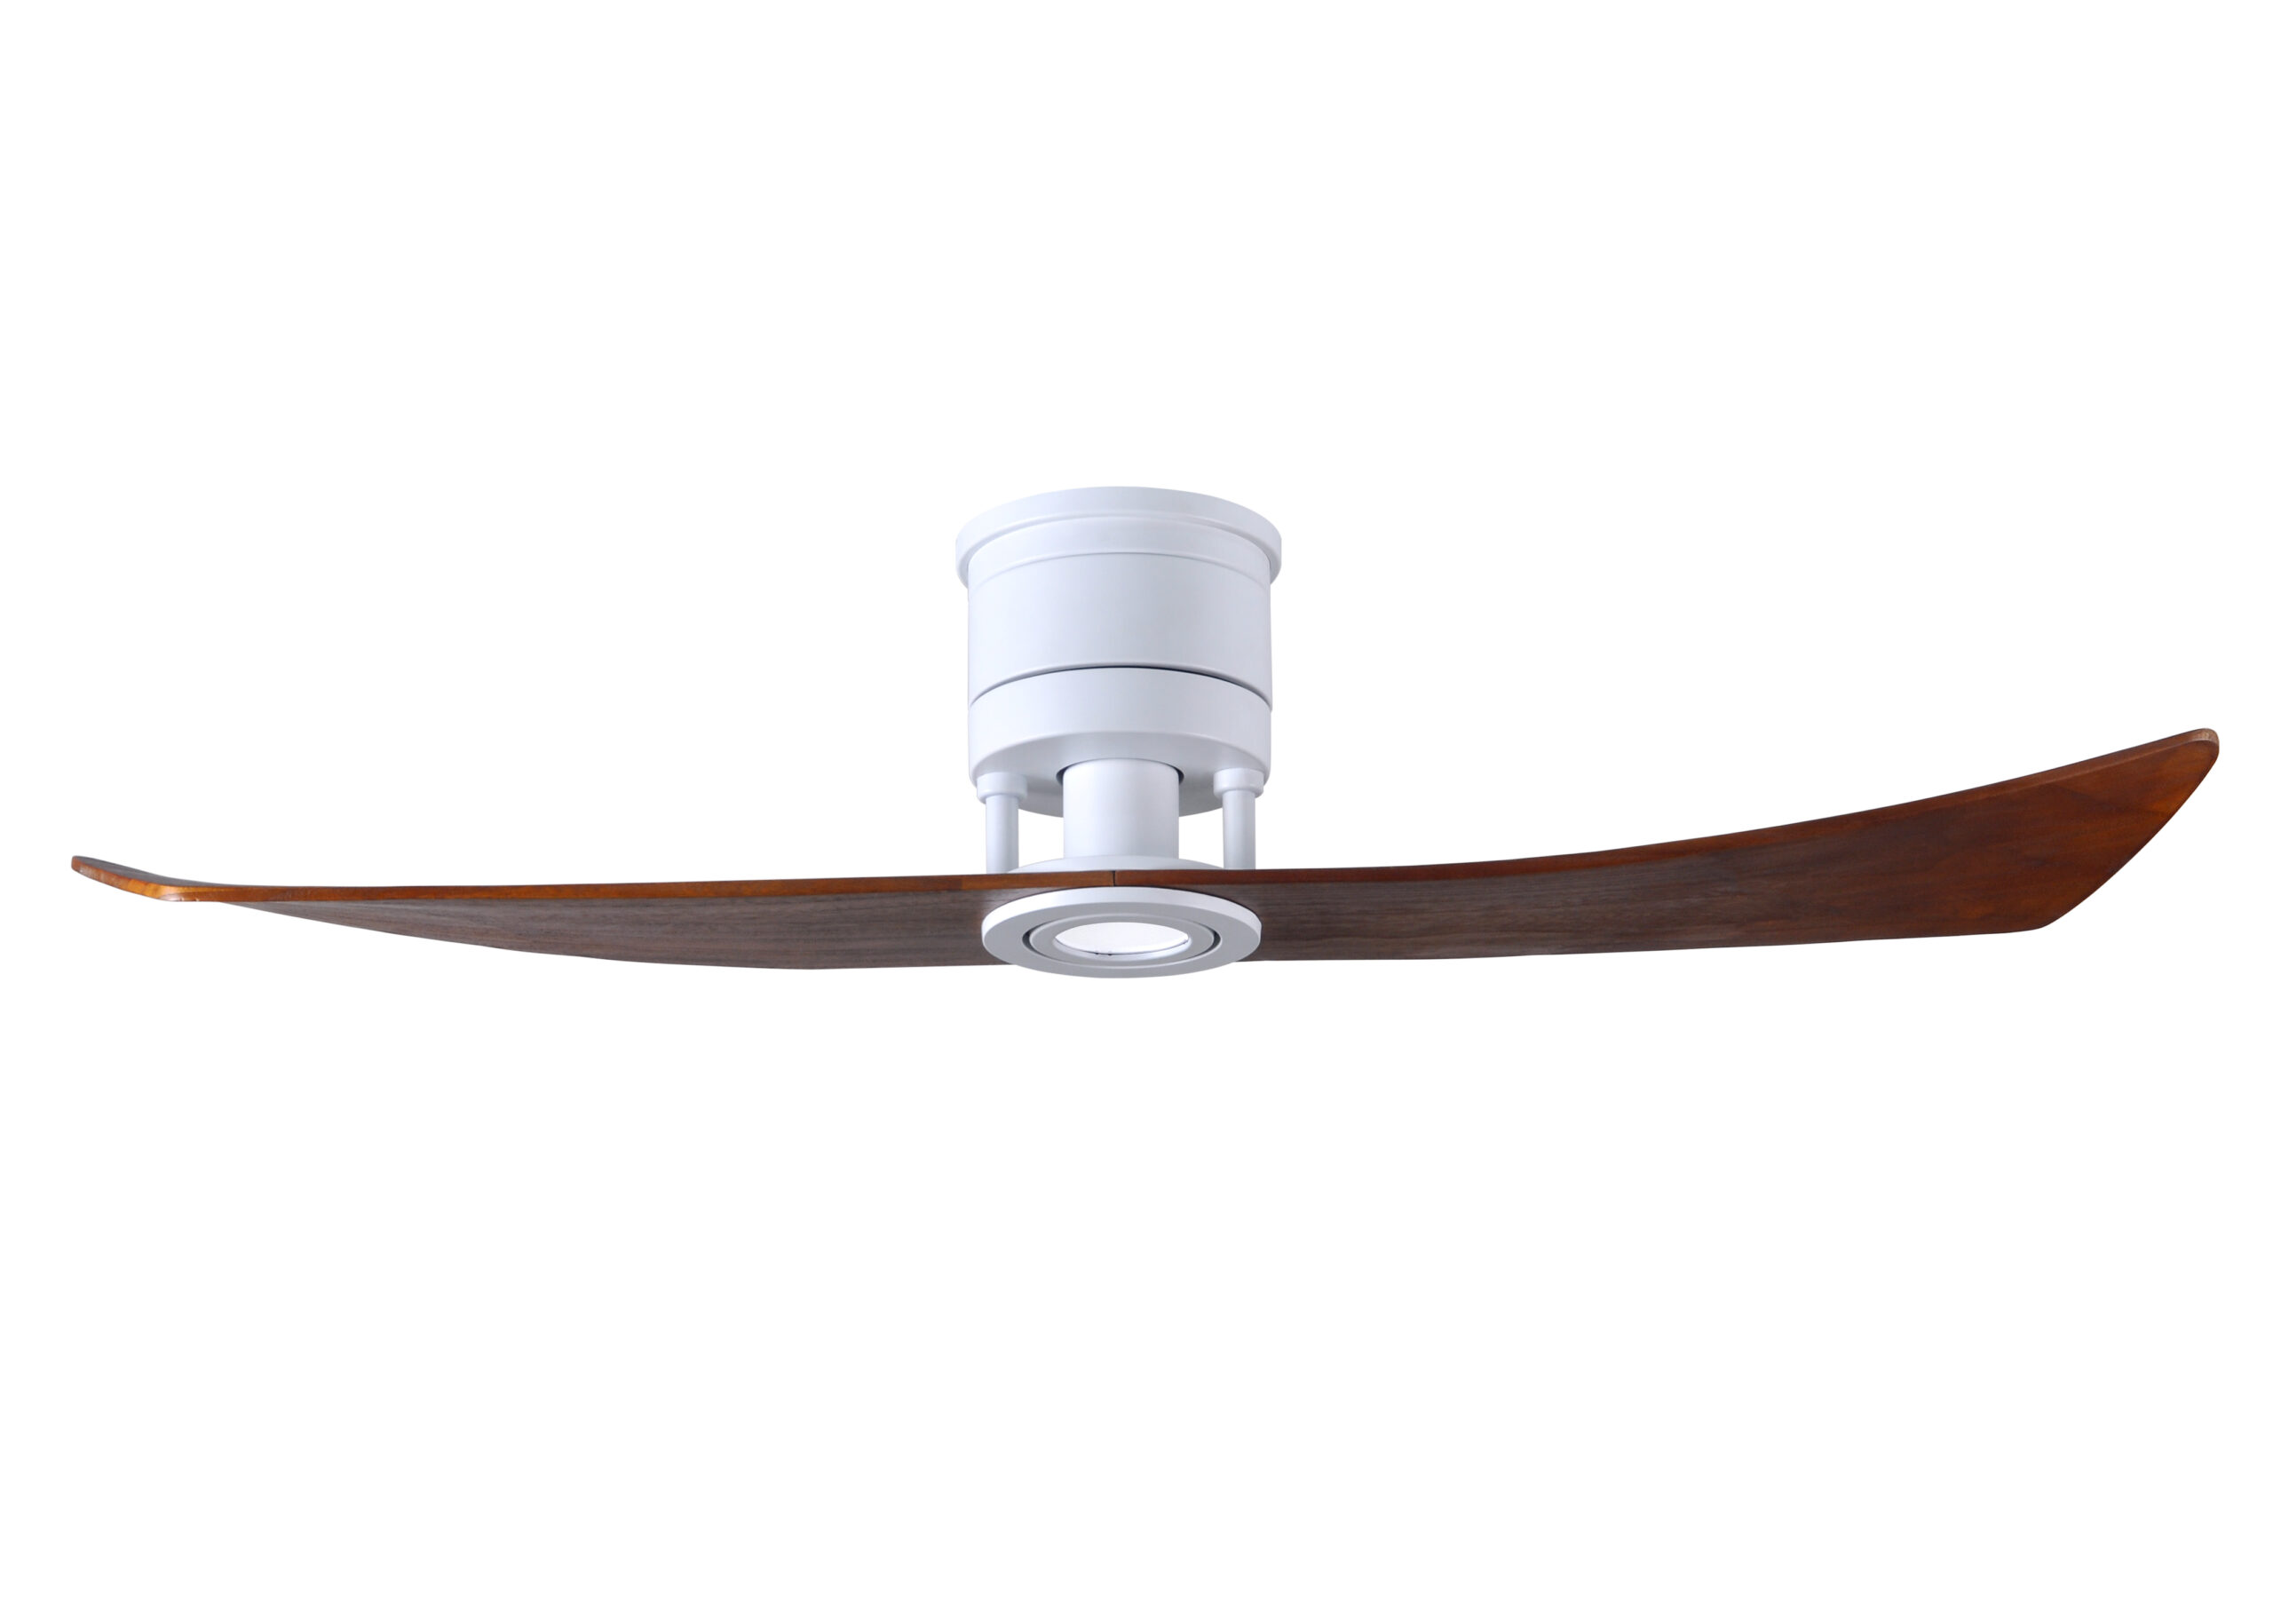 Lindsay 6-speed ceiling fan in Matte White finish with 52